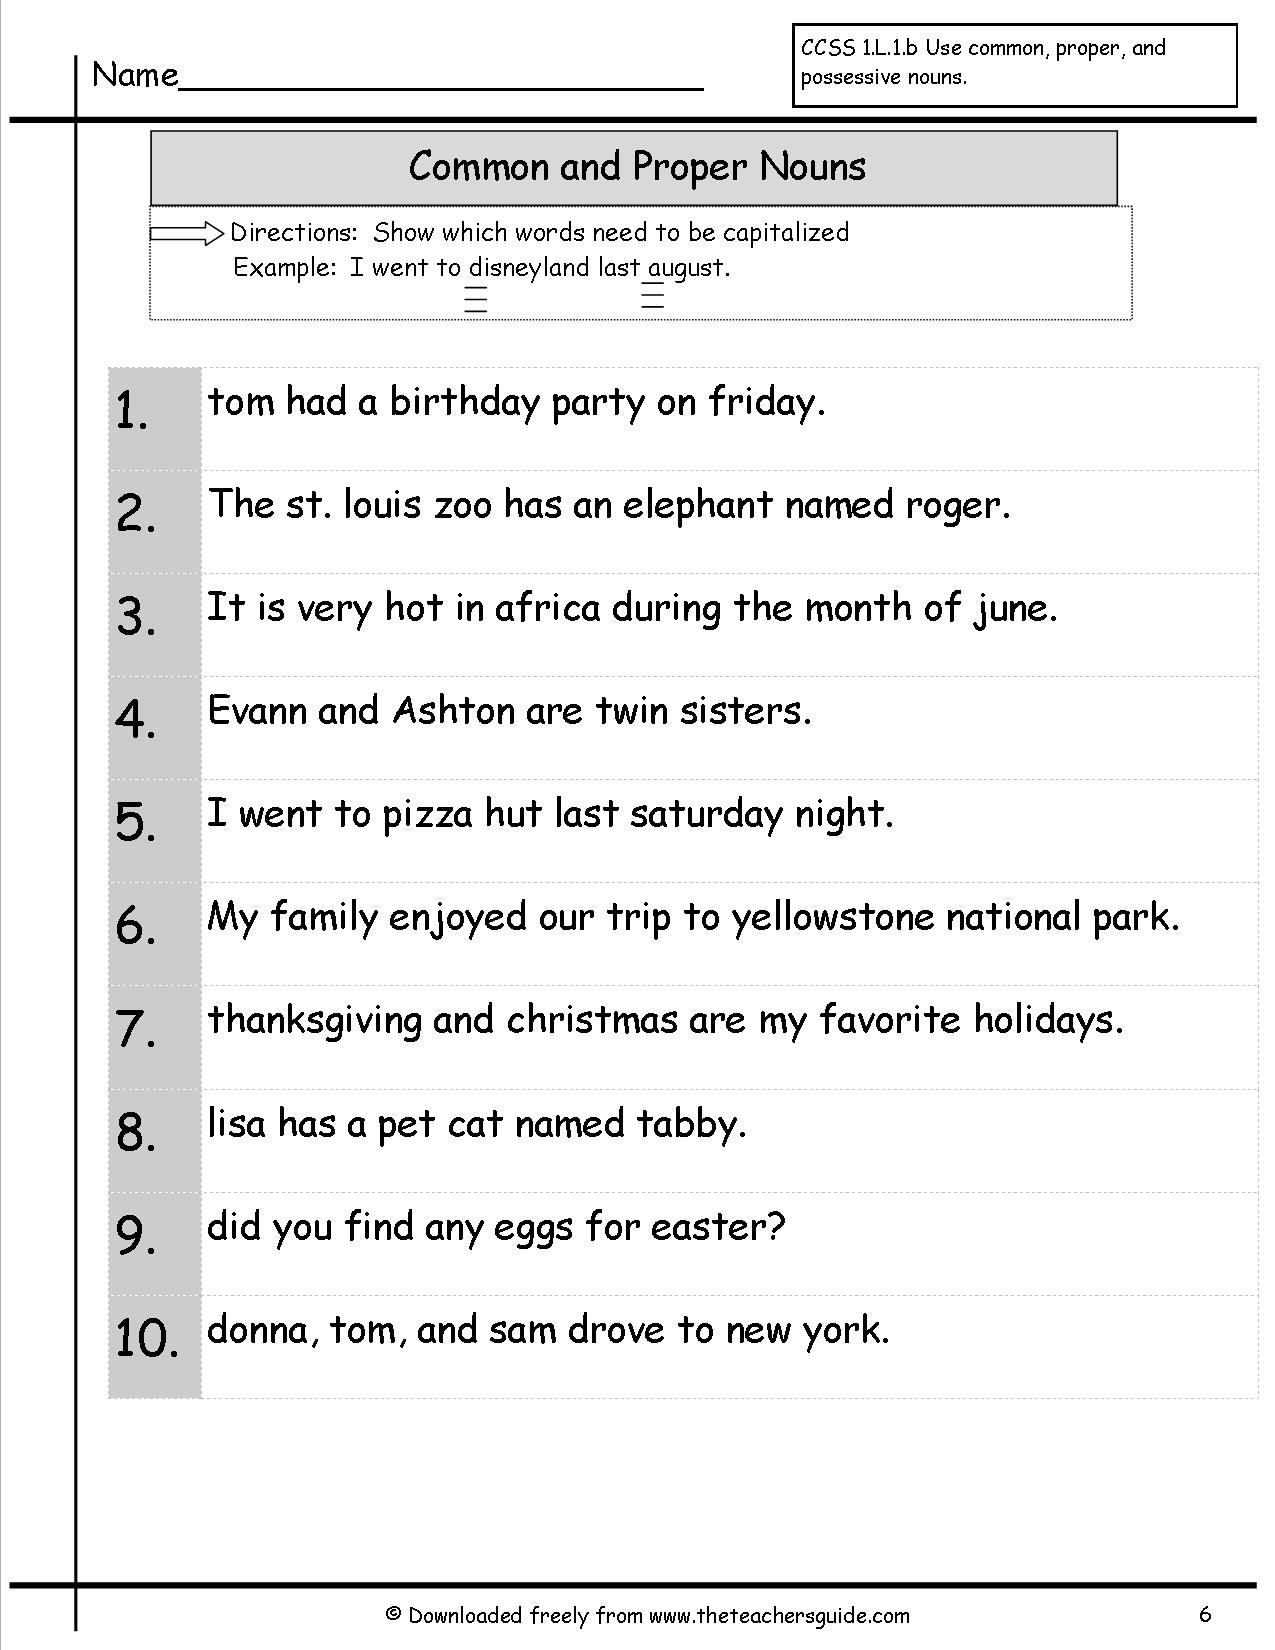 13 Best Images Of Common And Proper Nouns Worksheets Common And Proper Noun Worksheet First